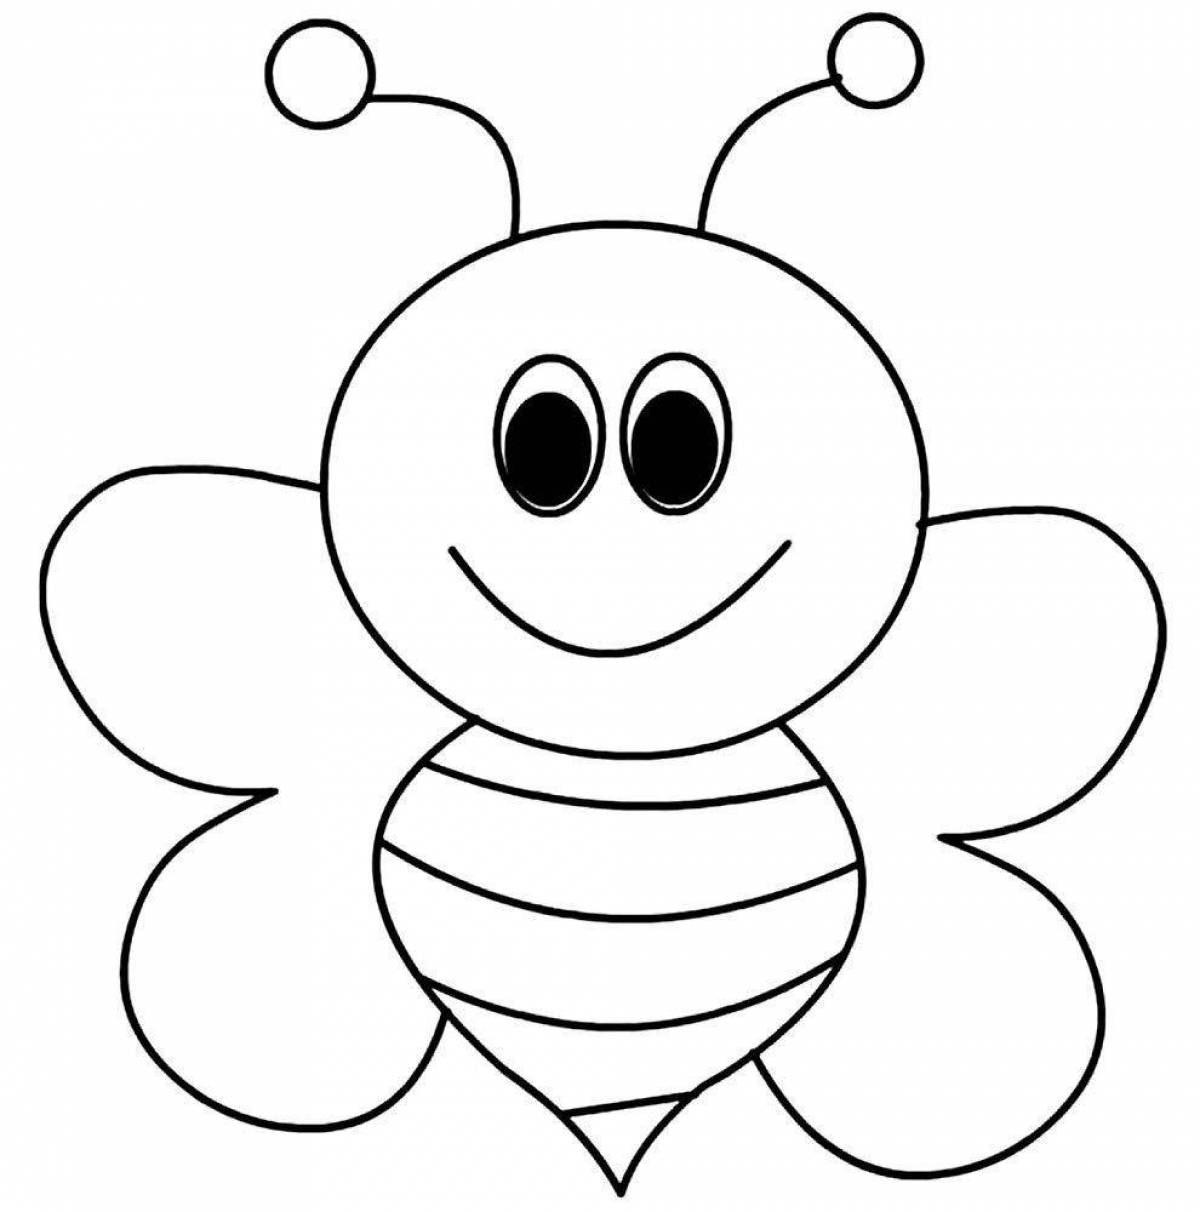 Humorous coloring bee for kids